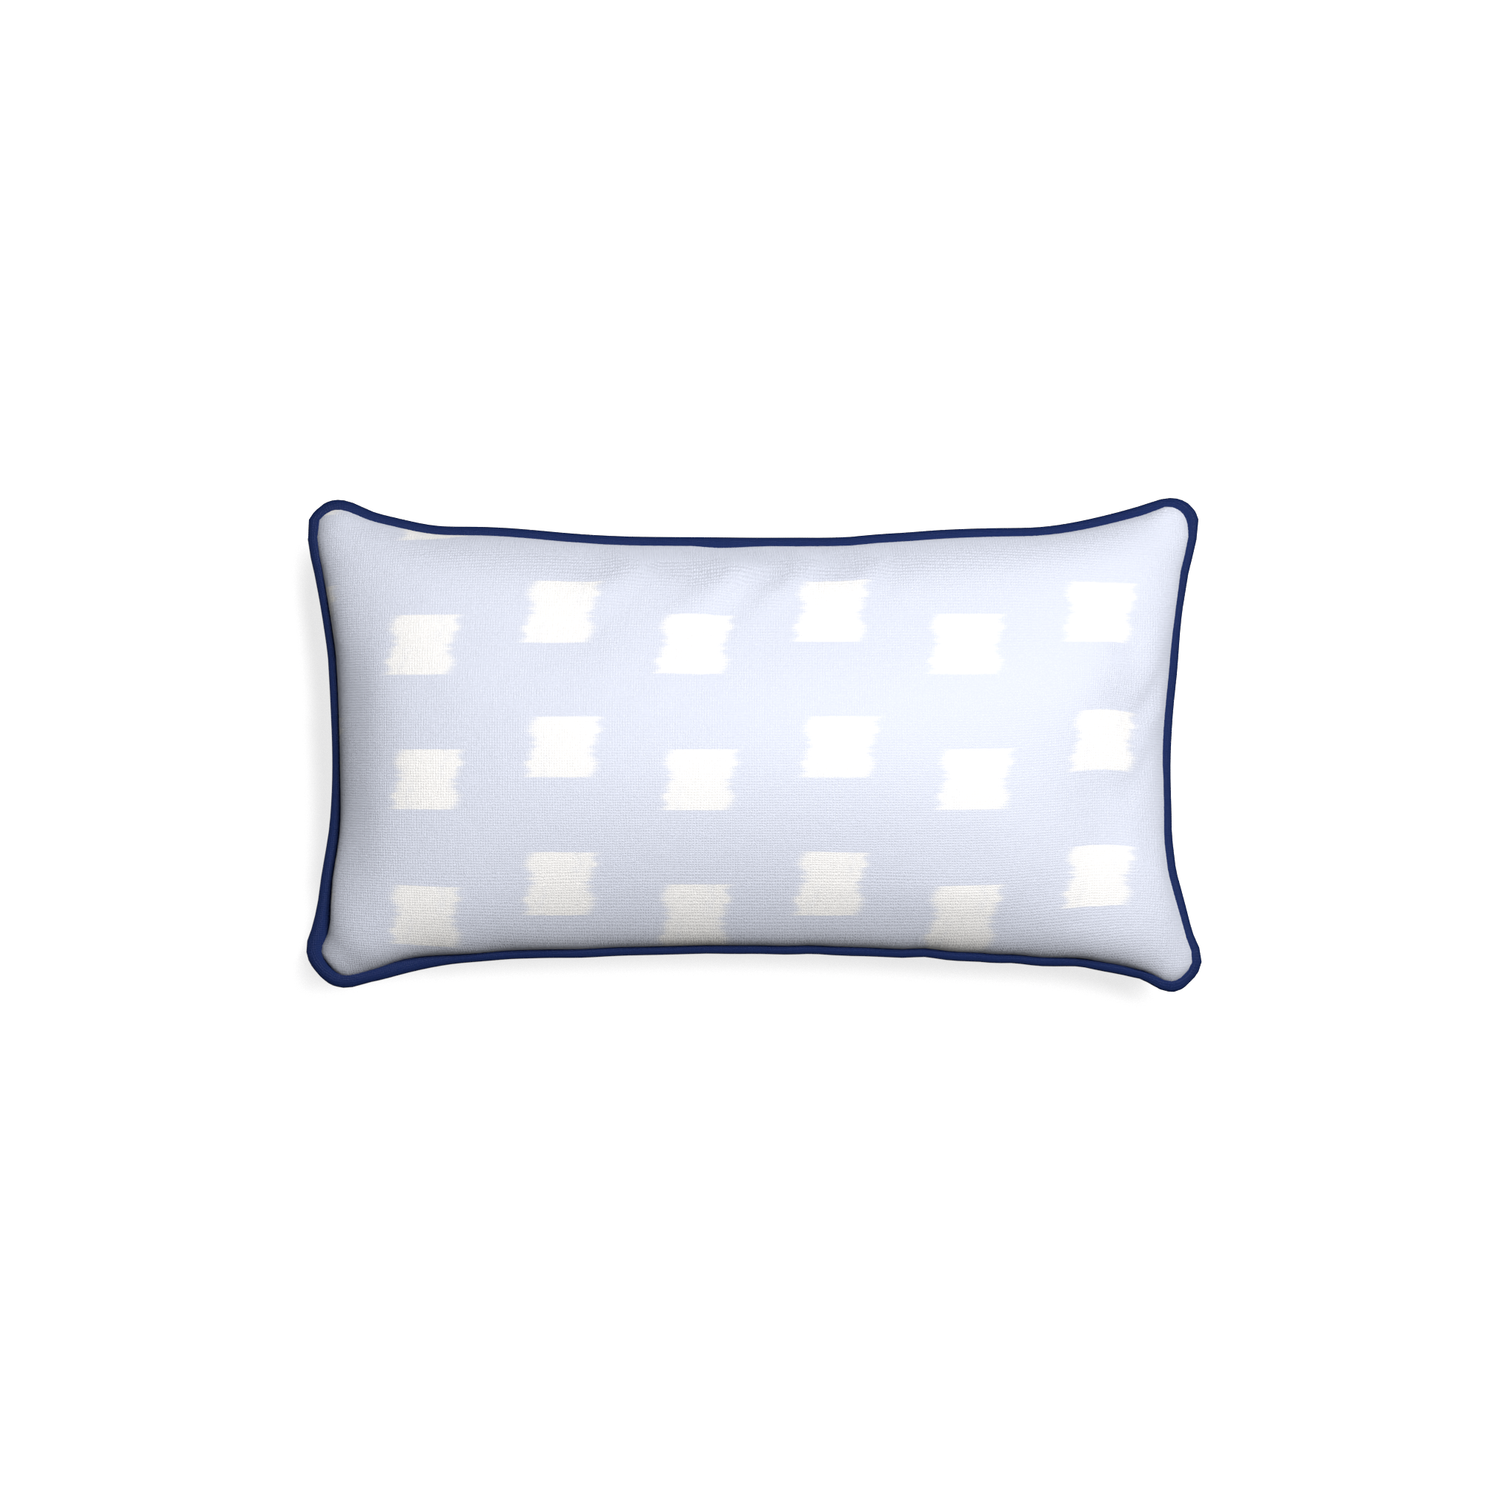 Petite-lumbar denton custom sky blue patternpillow with midnight piping on white background